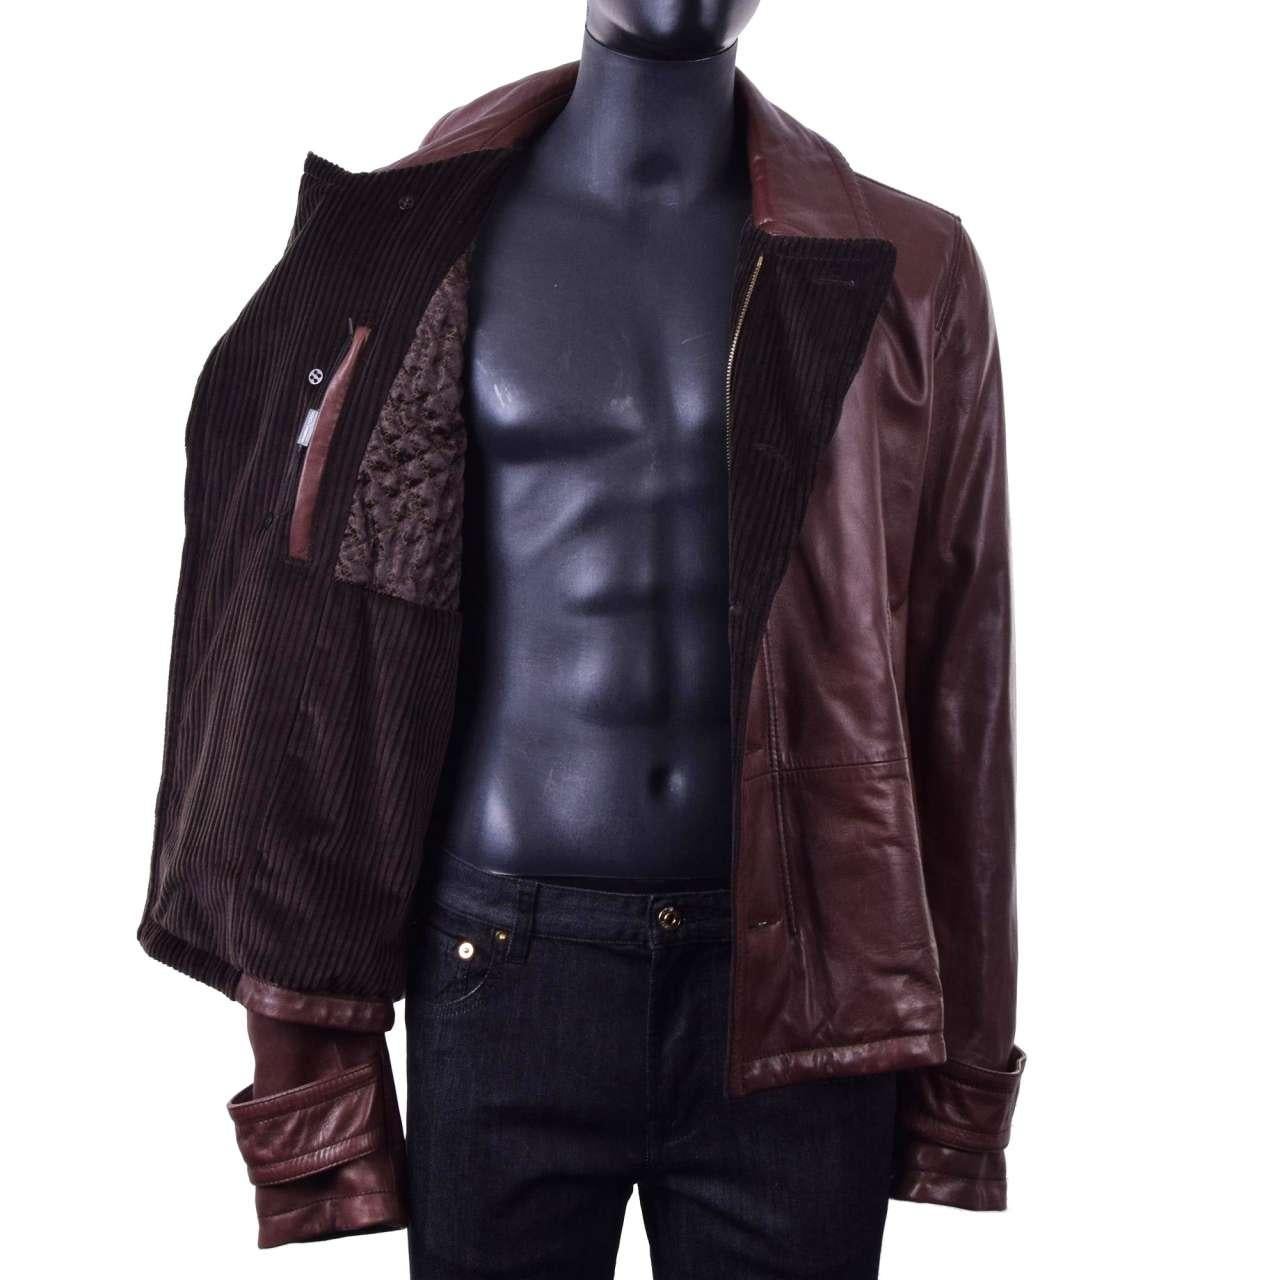 - Nappa lamb leather jacket with a contrast tweed collar by DOLCE & GABBANA Black Line - New with tag - Former RRP: EUR 1.950 - MADE in ITALY - Model: G9BQ6L-FUL1L-M0696 - Material: 90% Lambskin, 10% Cotton - Lining: 50% Cotton, 35% Acetat, 15%